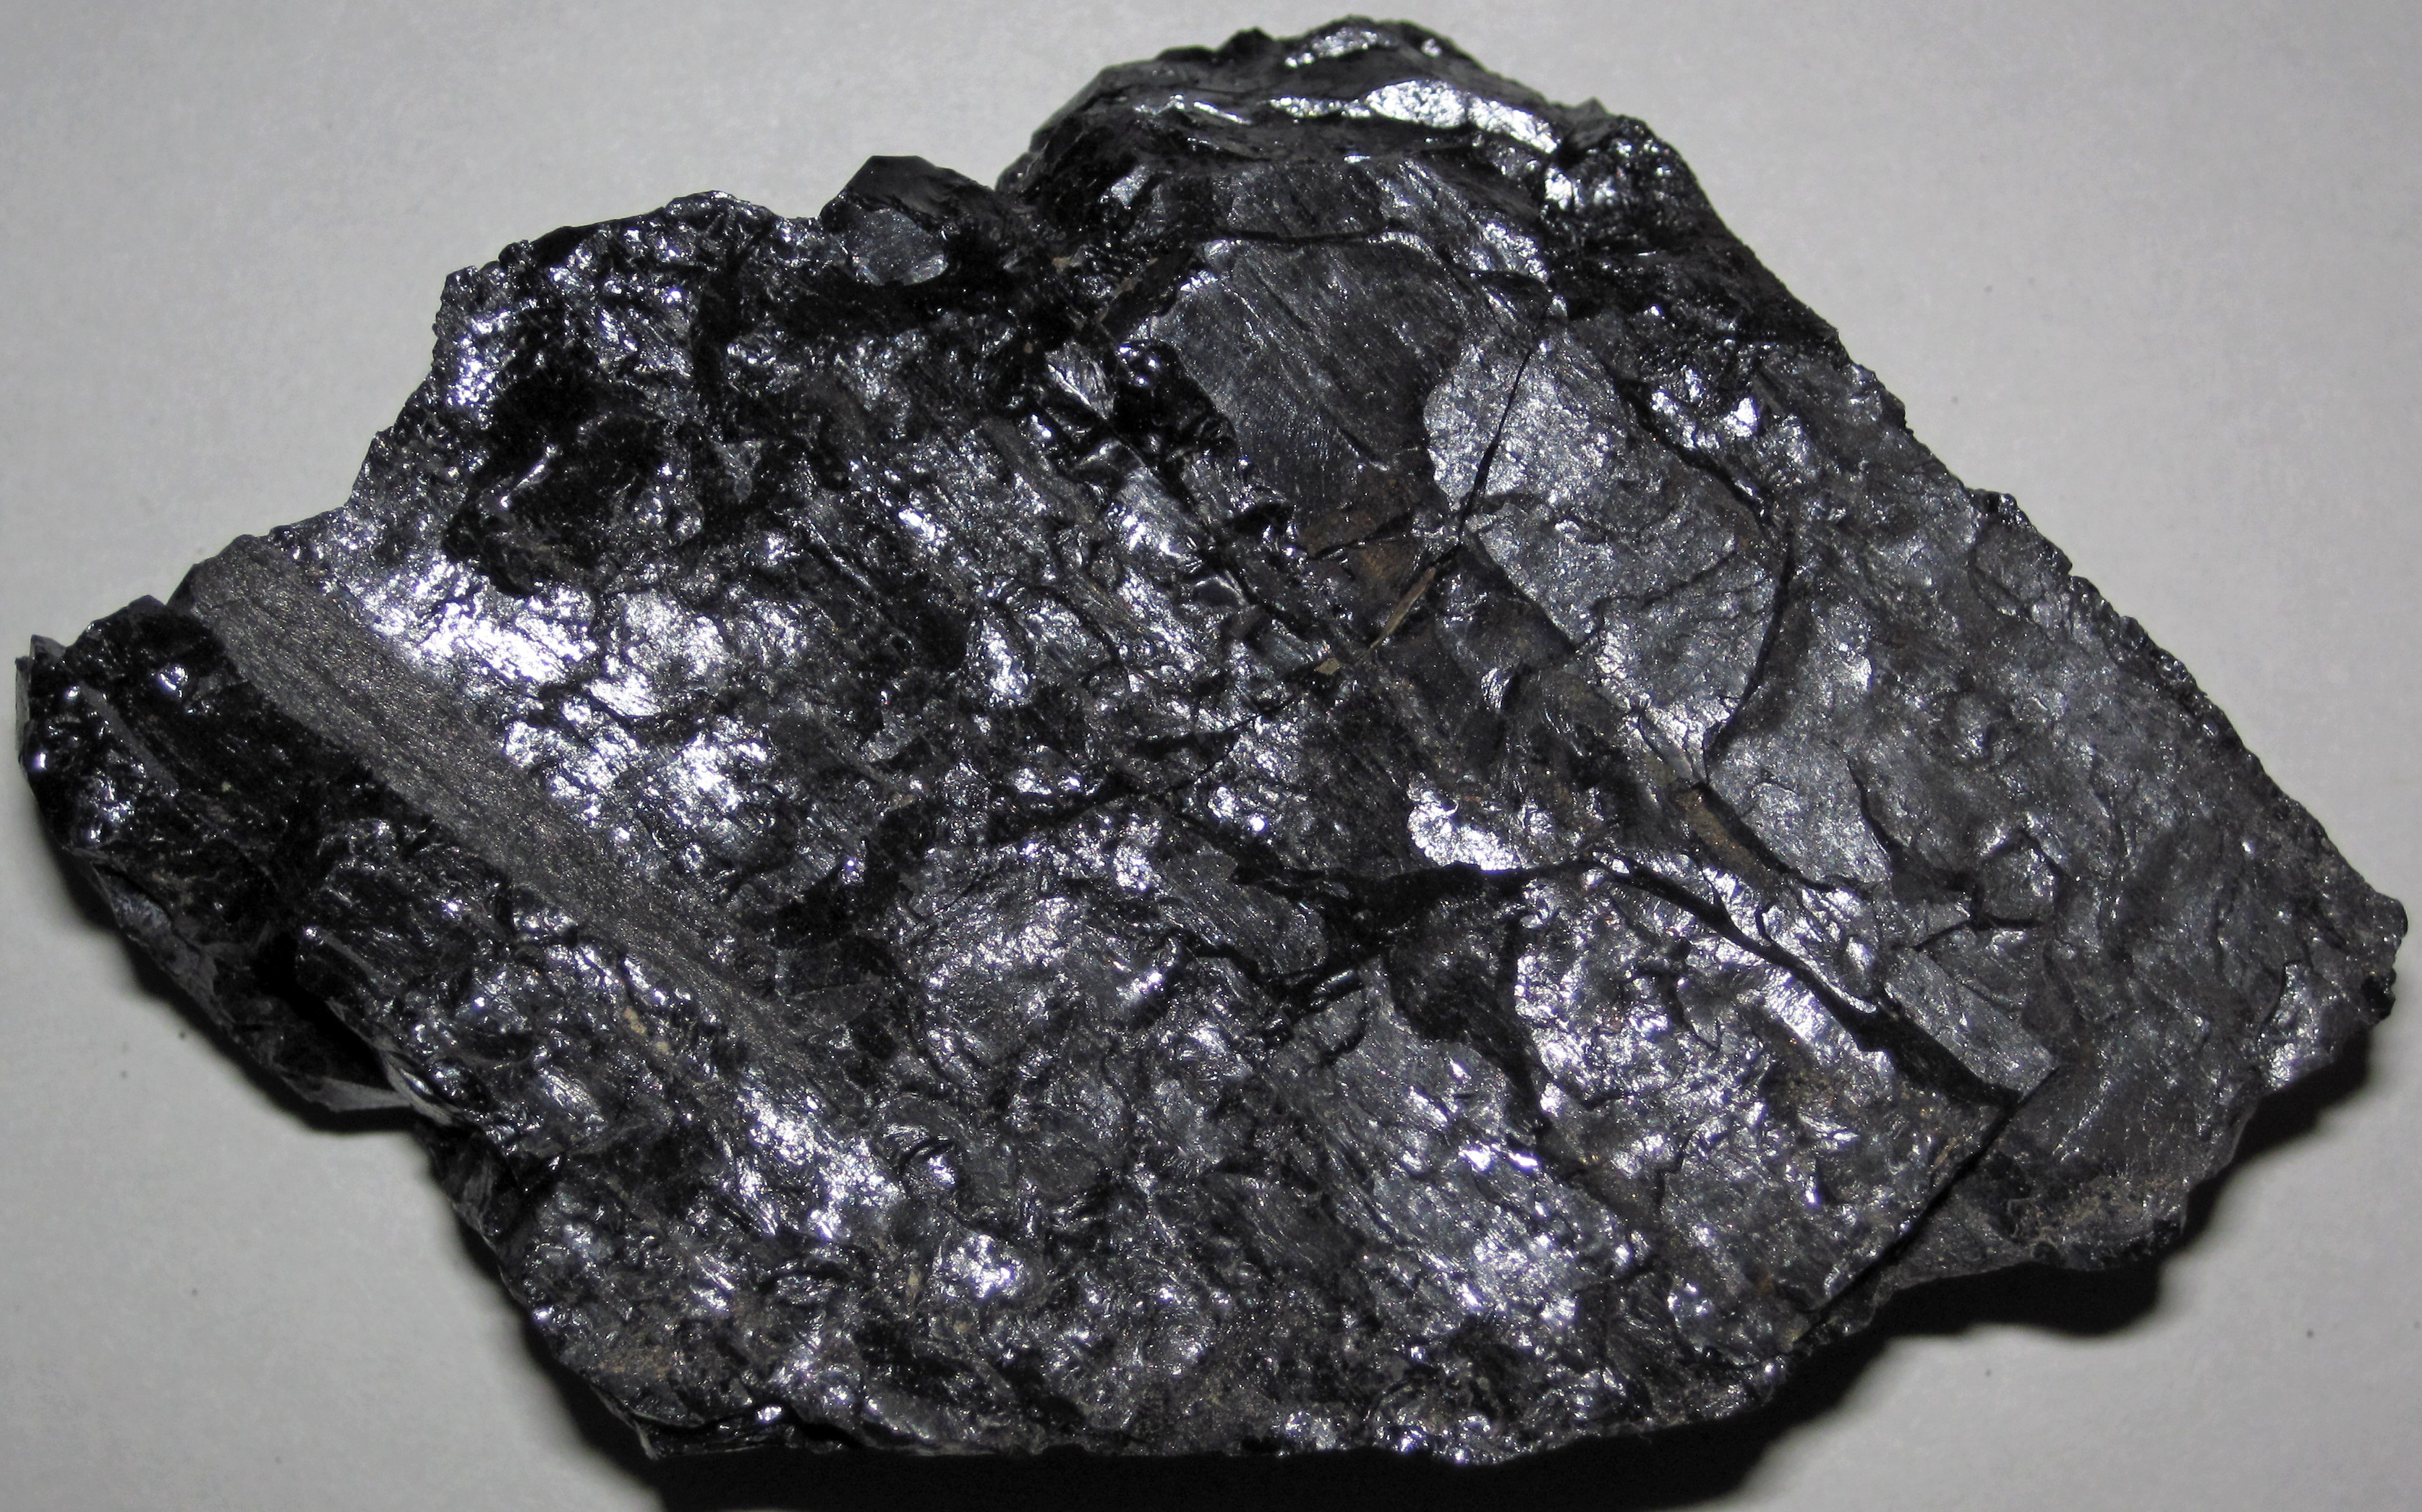 <p>What type of rock is coal and which group is it from?</p>